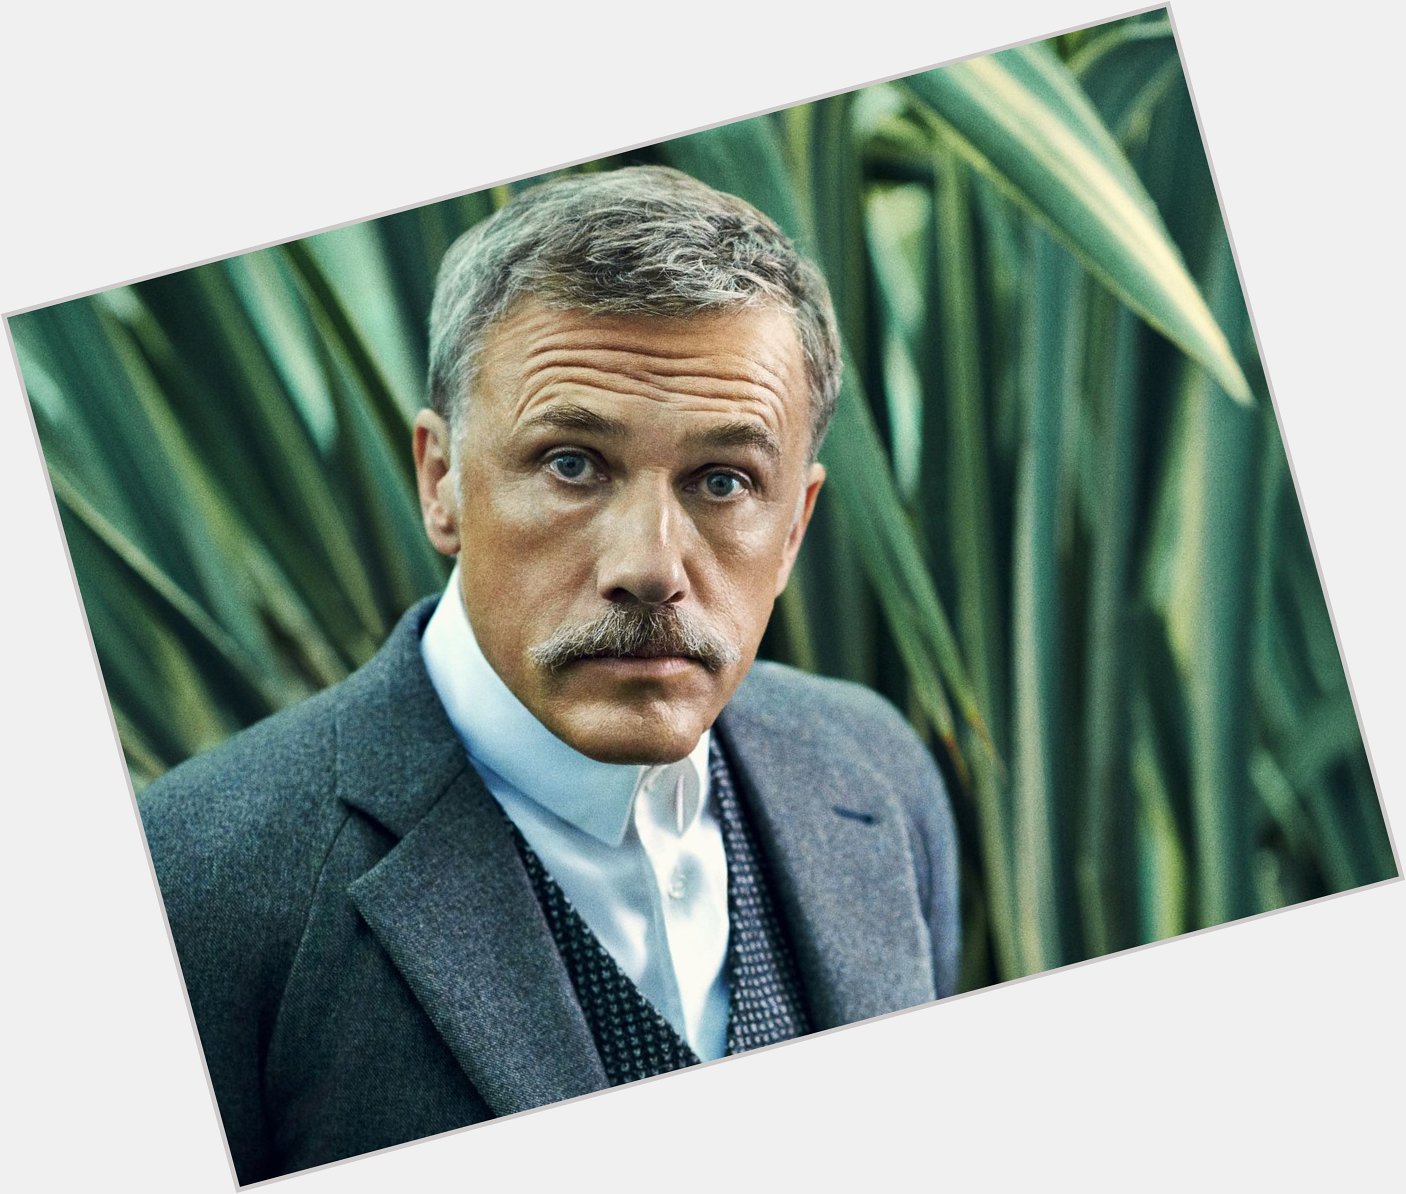 Happy Birthday, Christoph Waltz! Born on this day in 1956. Photograph by Tomo Brejc. 